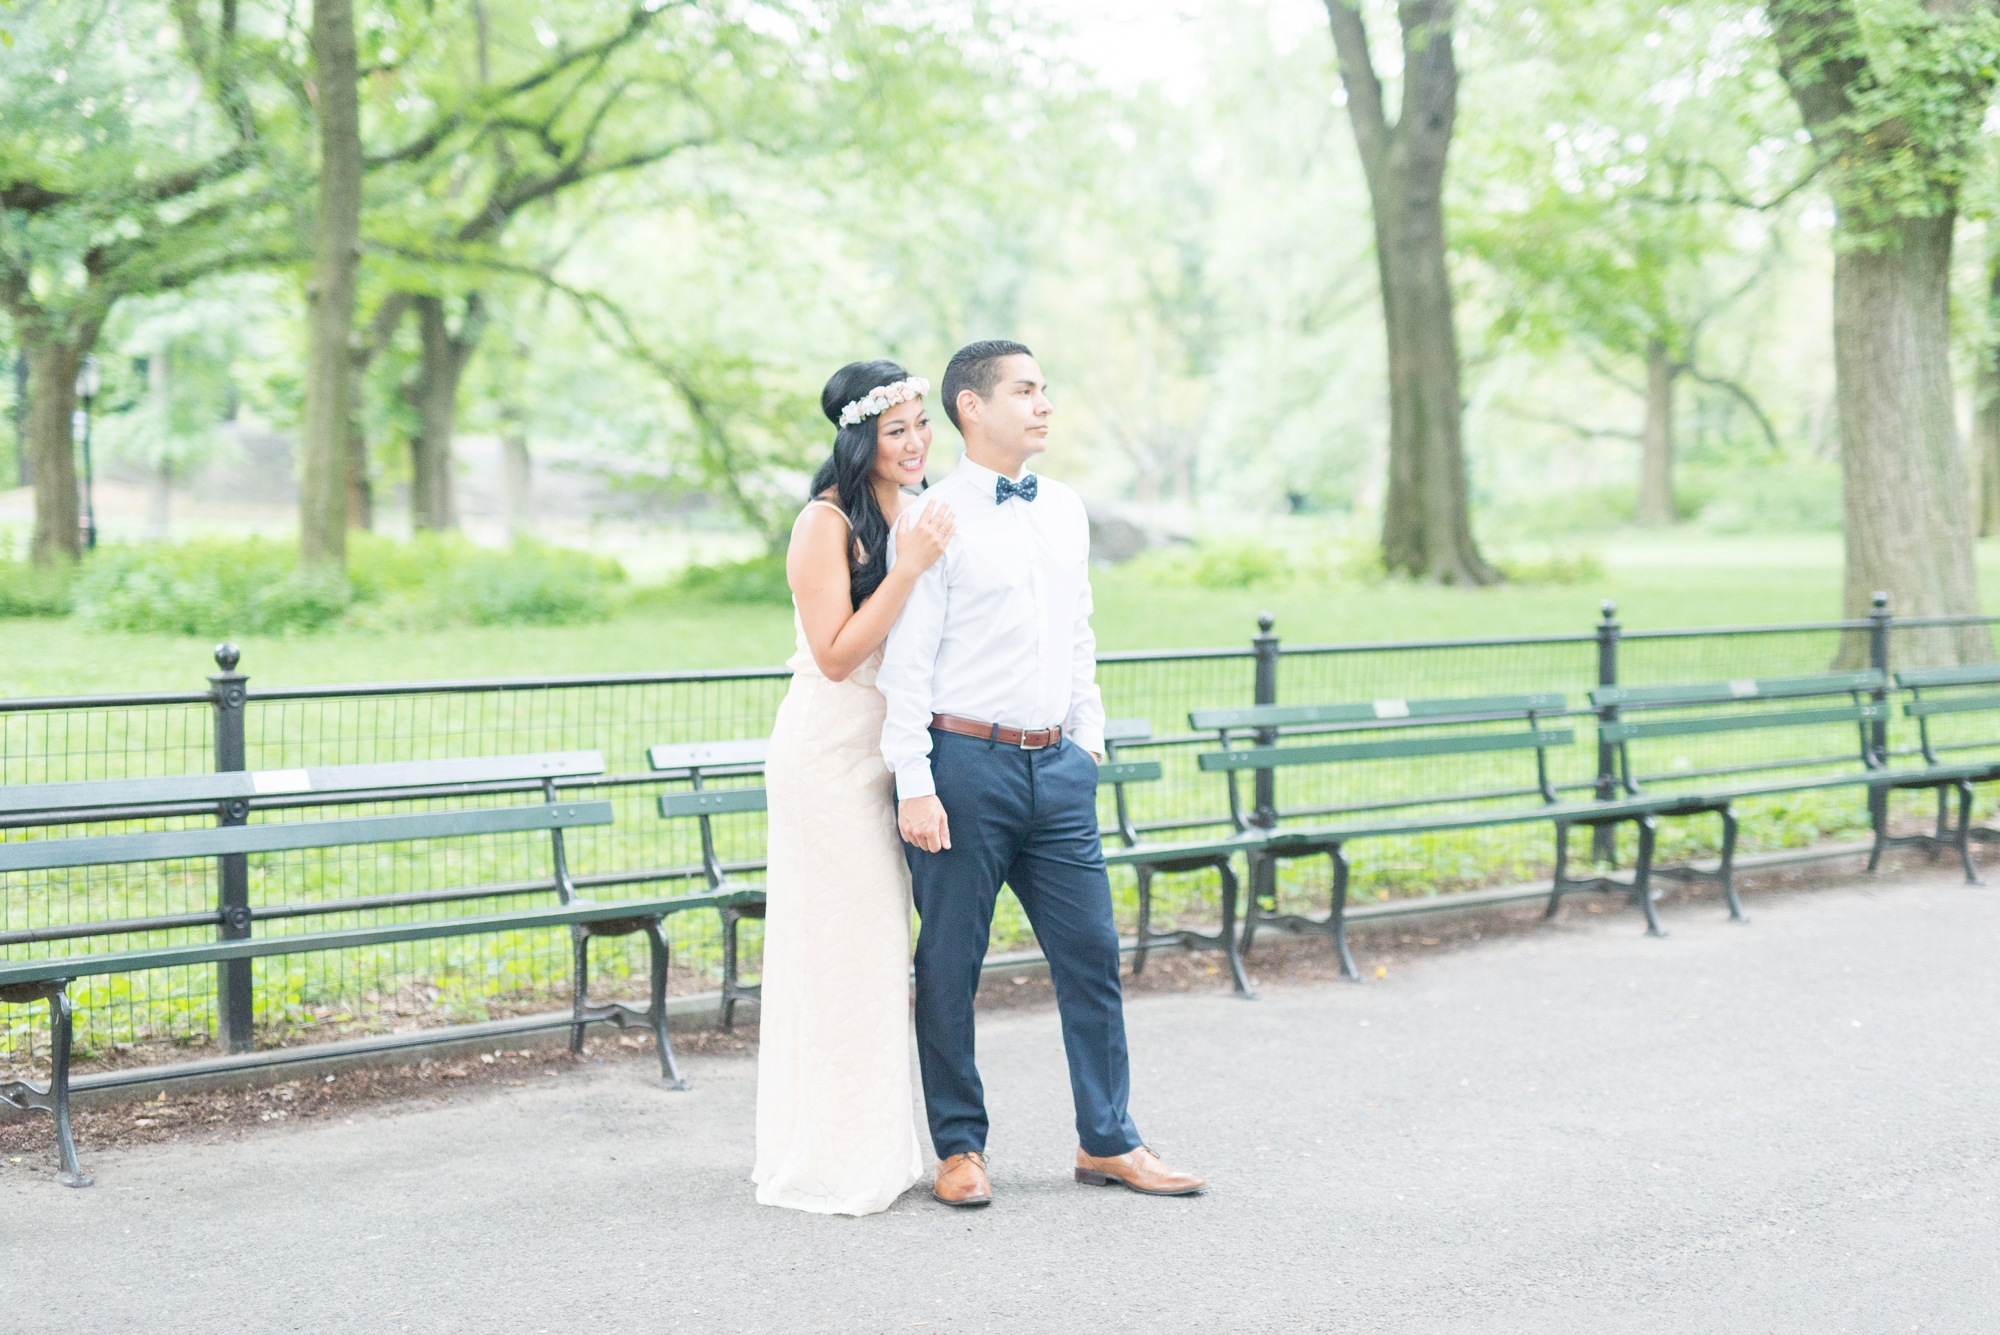 wedding-photography-in-central-park-new-york-city_0207